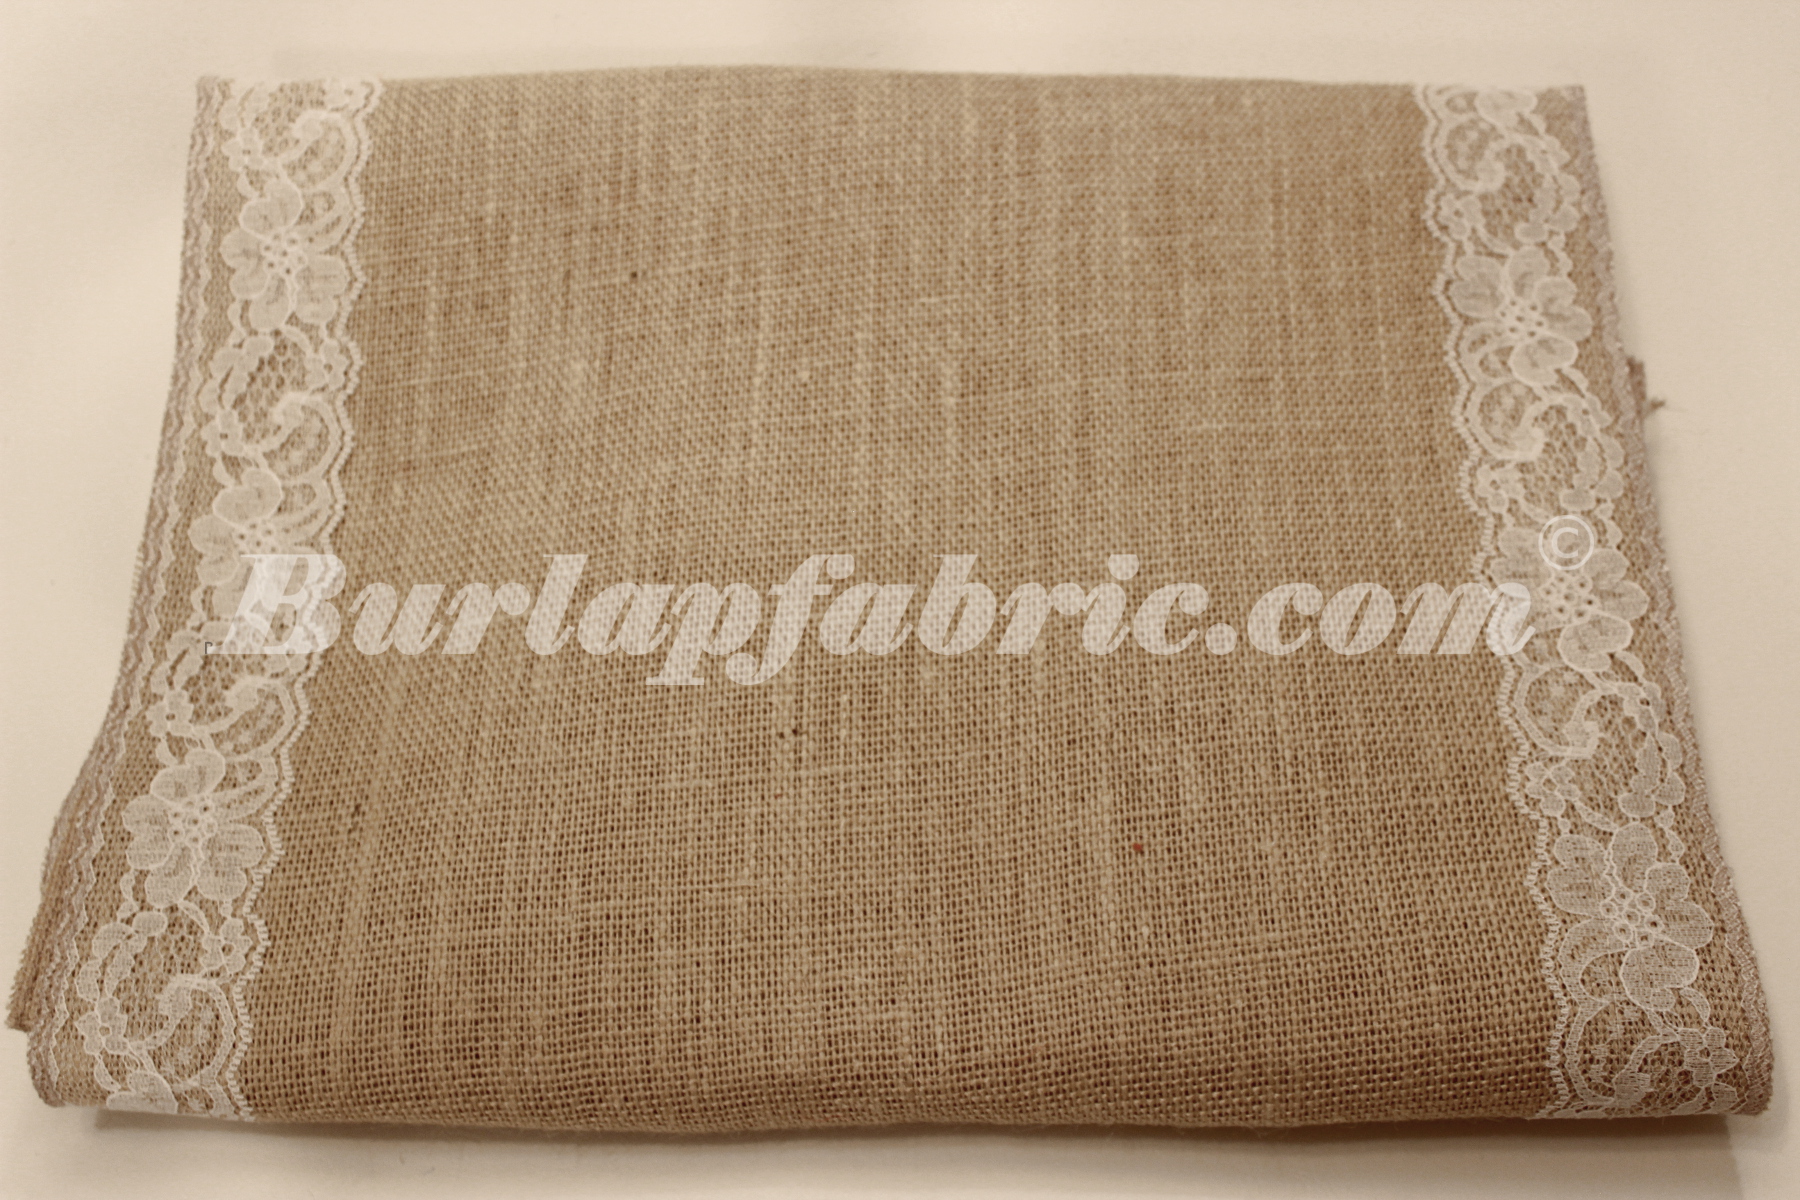 14" Natural Burlap Runner with 2" White Lace Borders